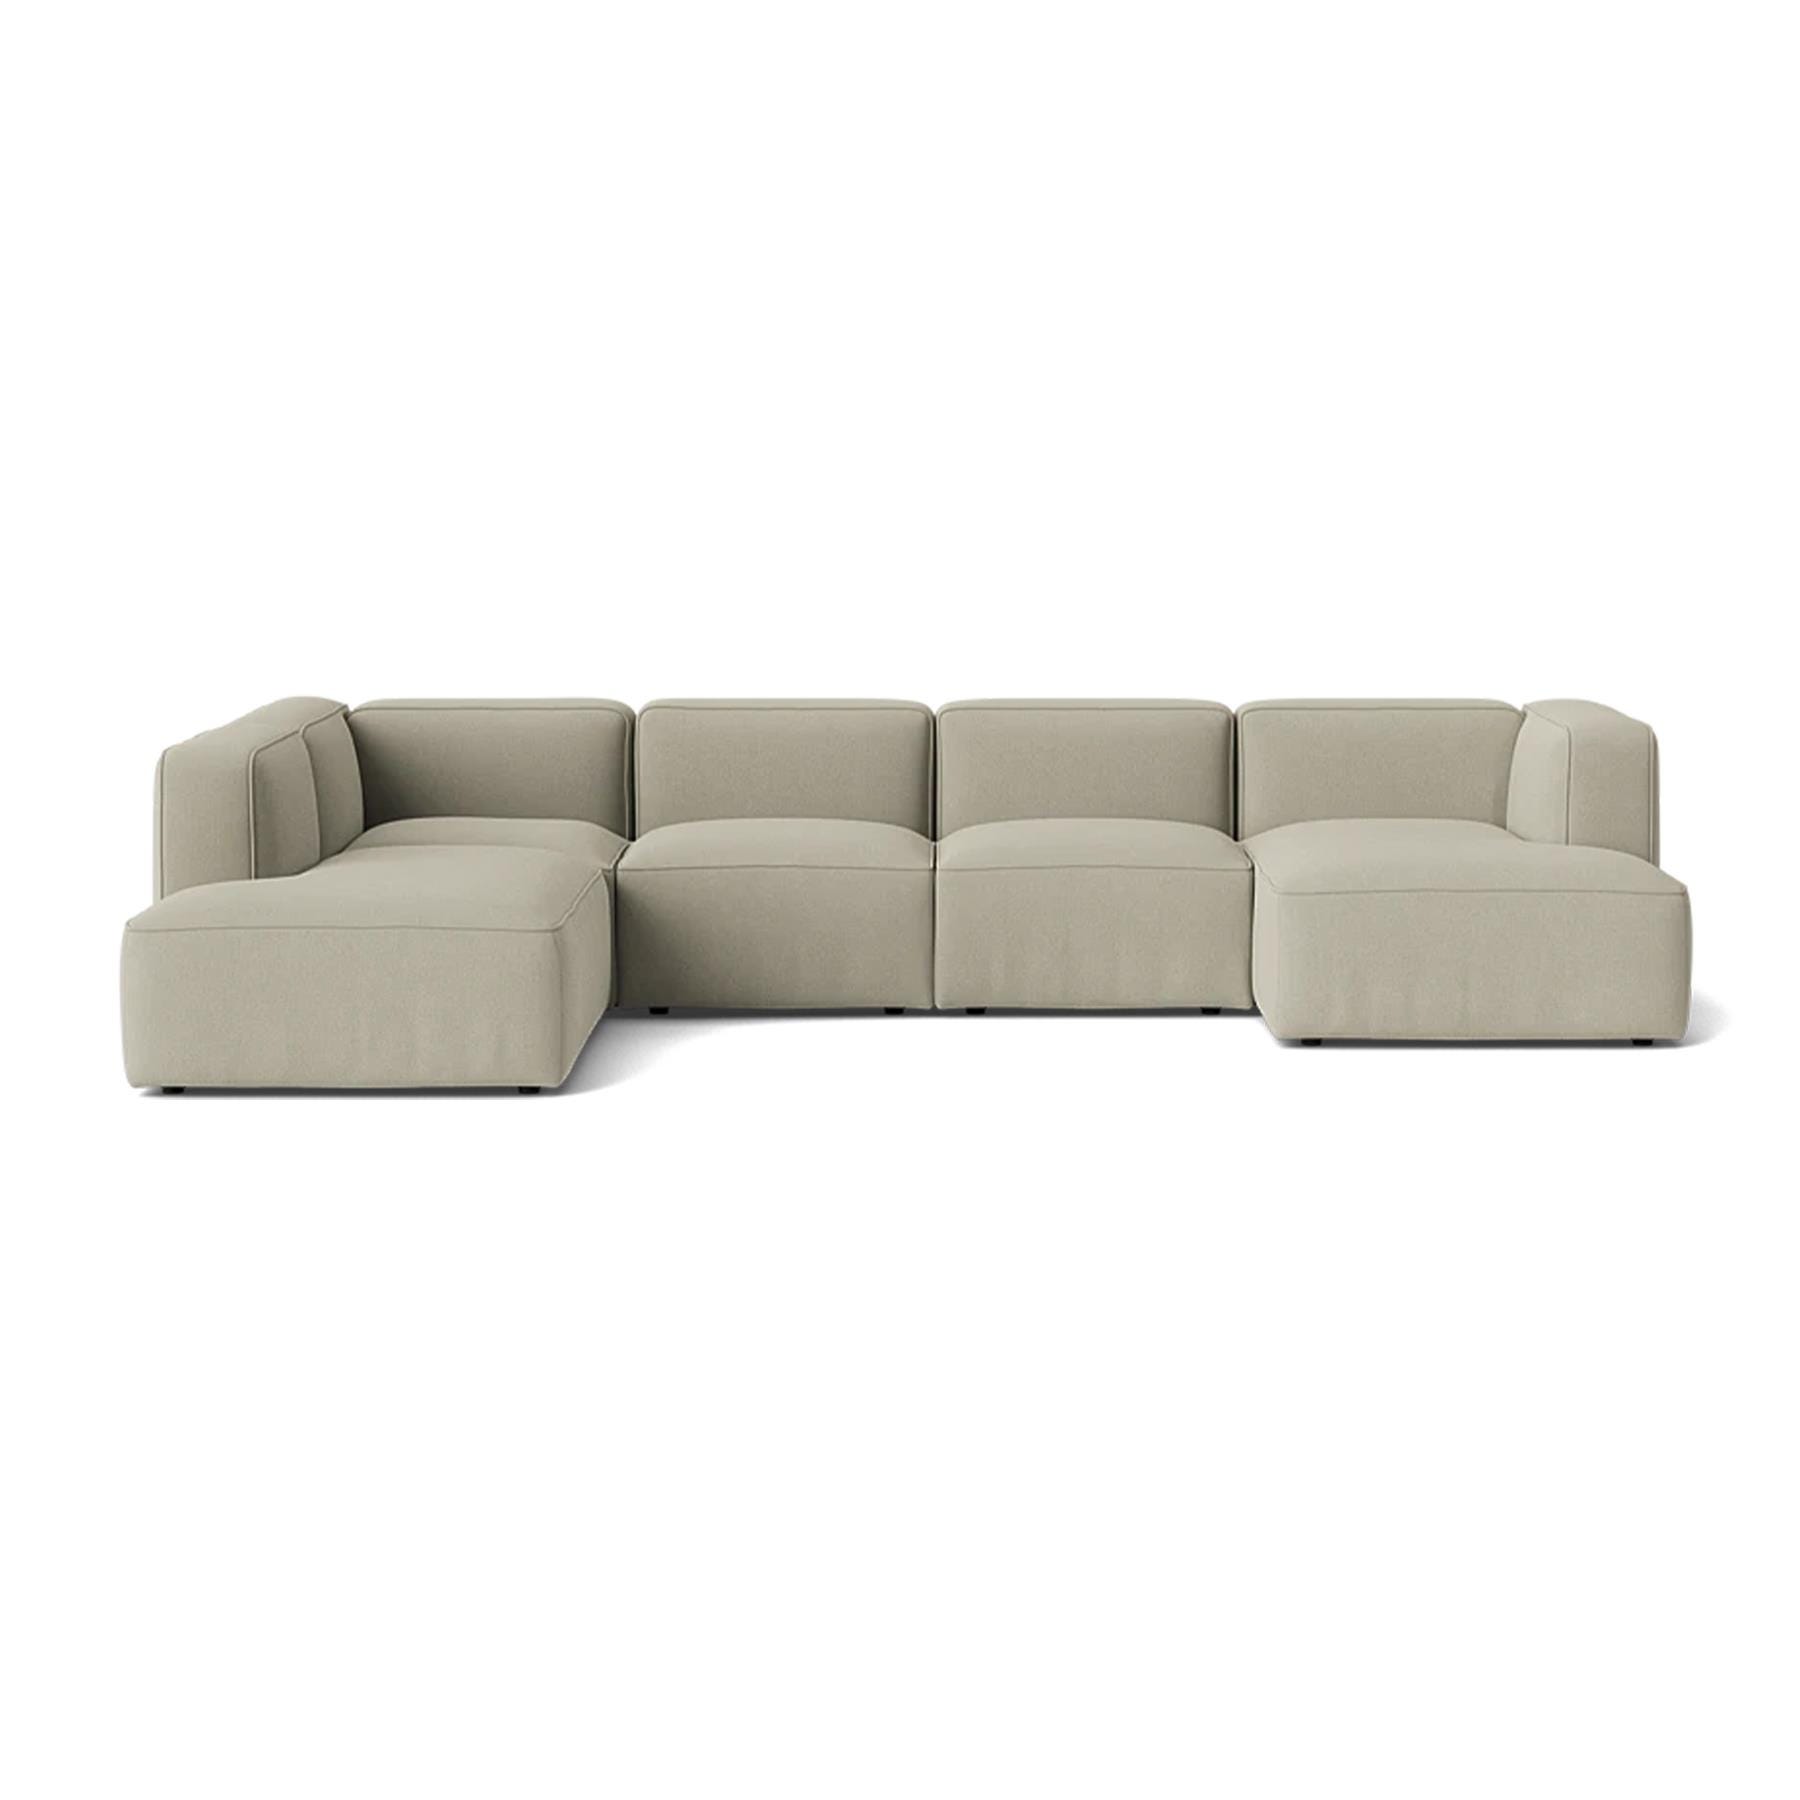 Make Nordic Basecamp Family Sofa Fiord 322 Right Brown Designer Furniture From Holloways Of Ludlow